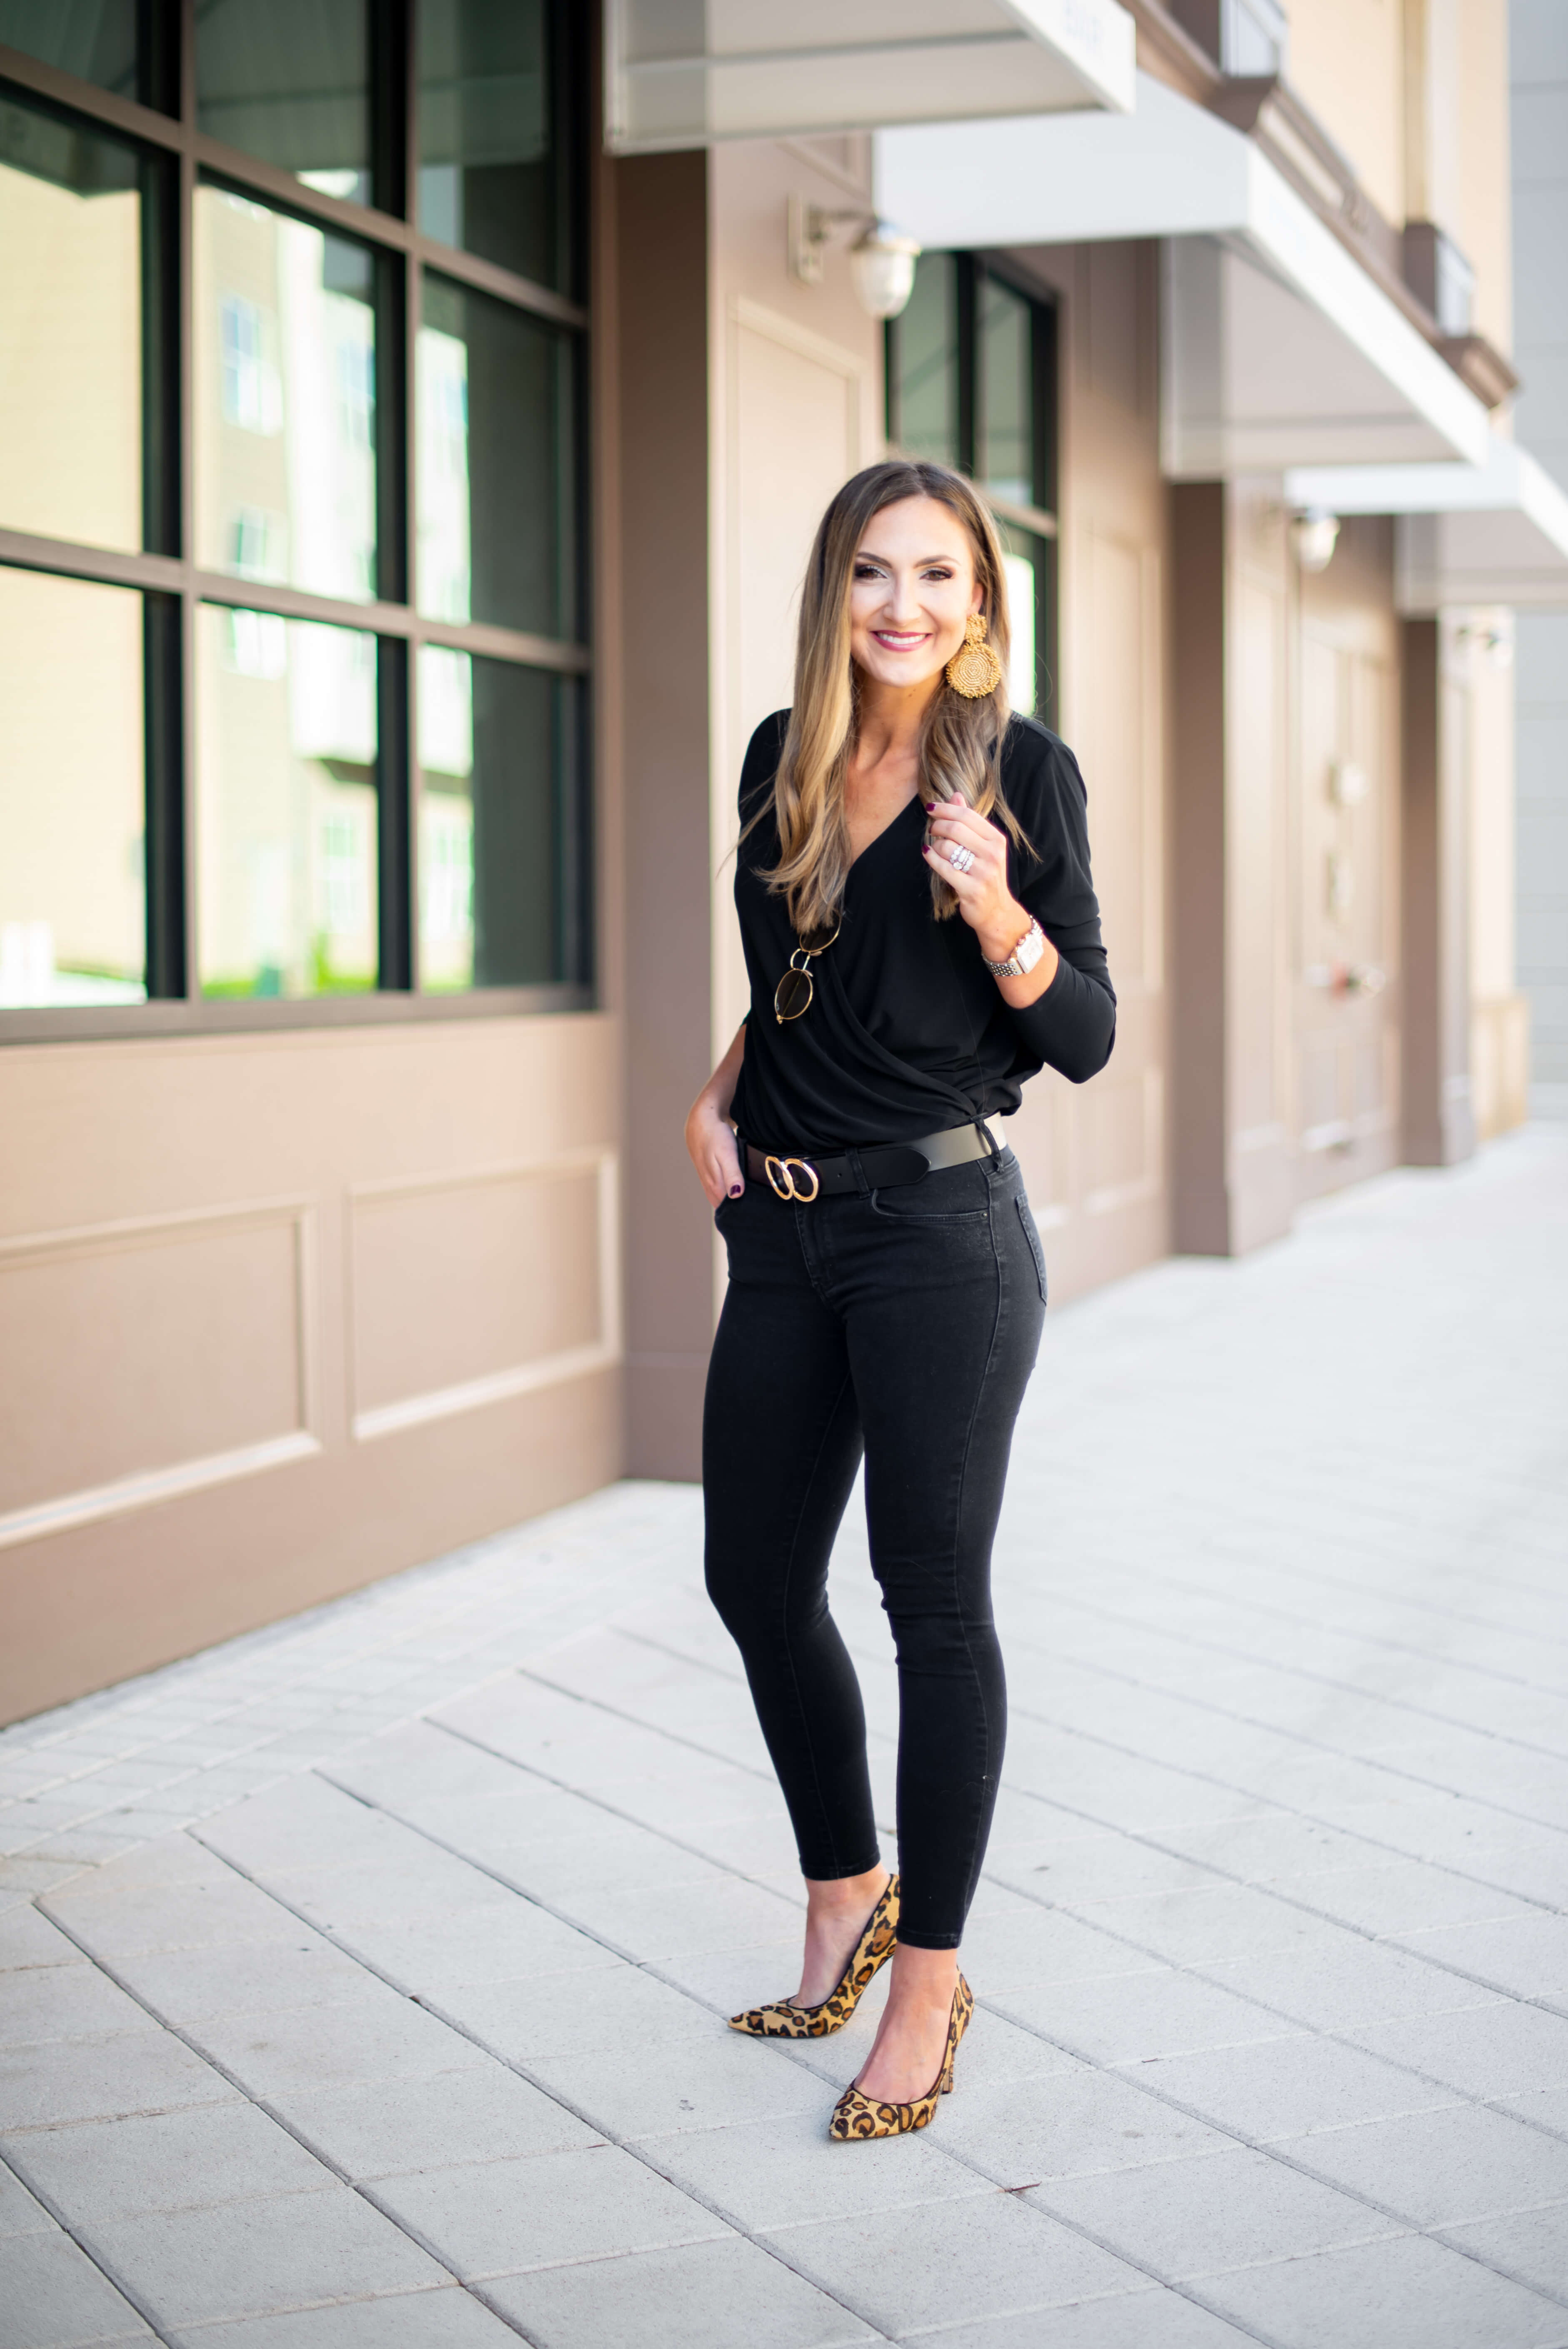 Macy's | How to Dress Up a Long Sleeve Black Bodysuit | 2 Ways featured by top Dallas fashion blog Style Your Senses